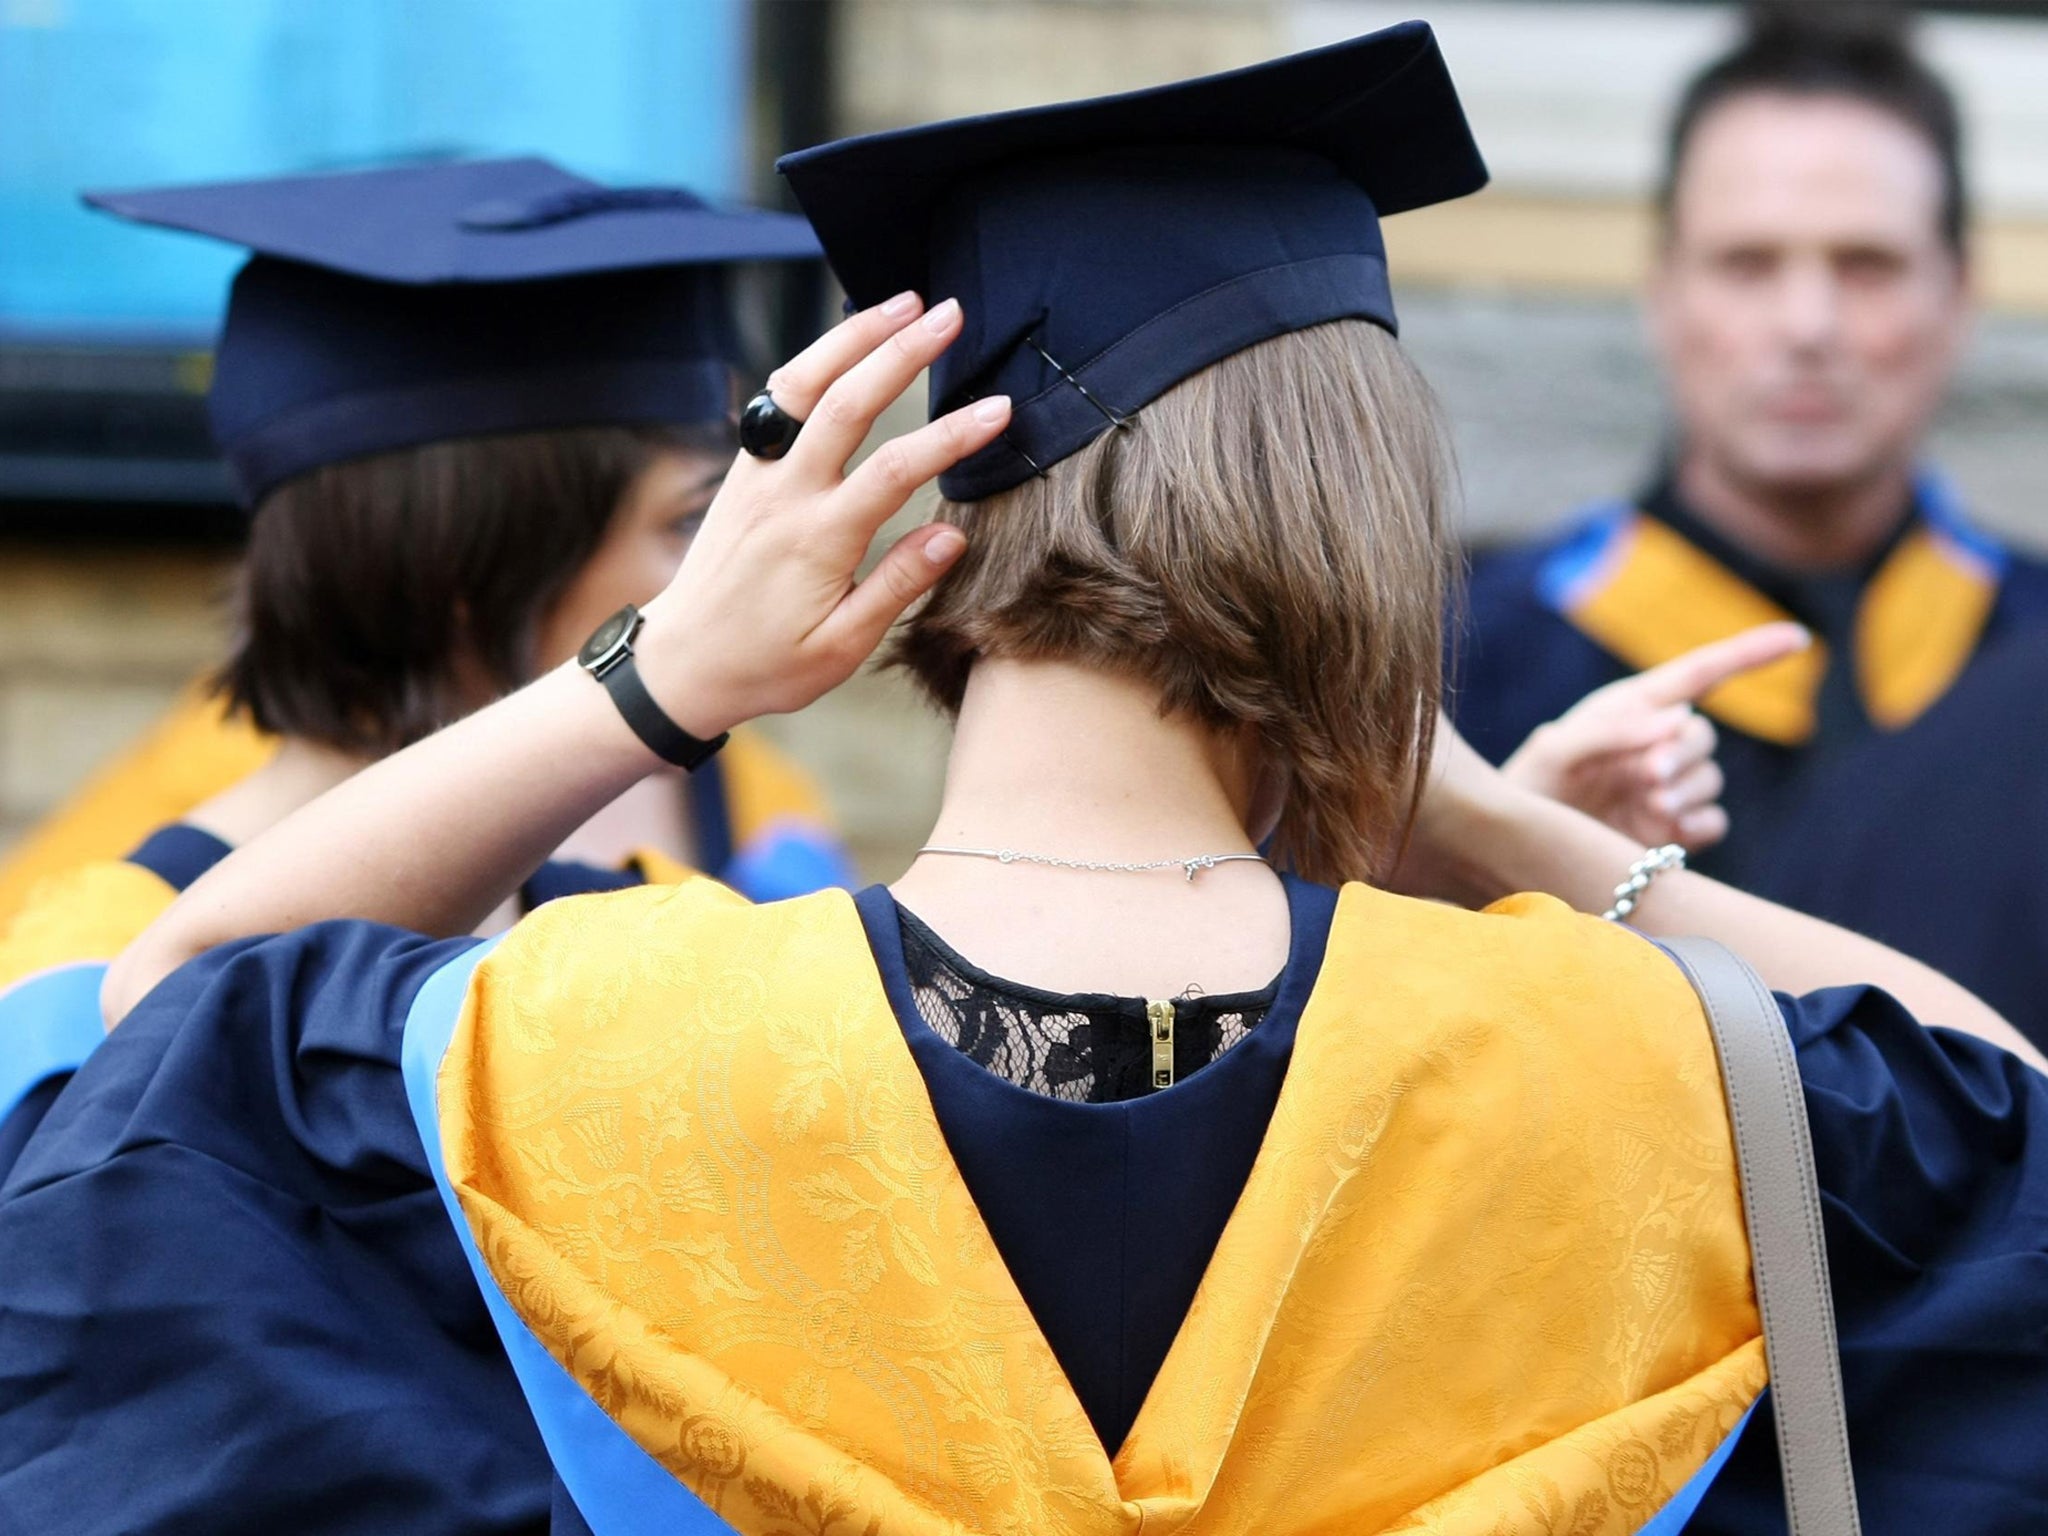 Today’s school leavers are becoming 'savvier' in shopping around for alternative career routes